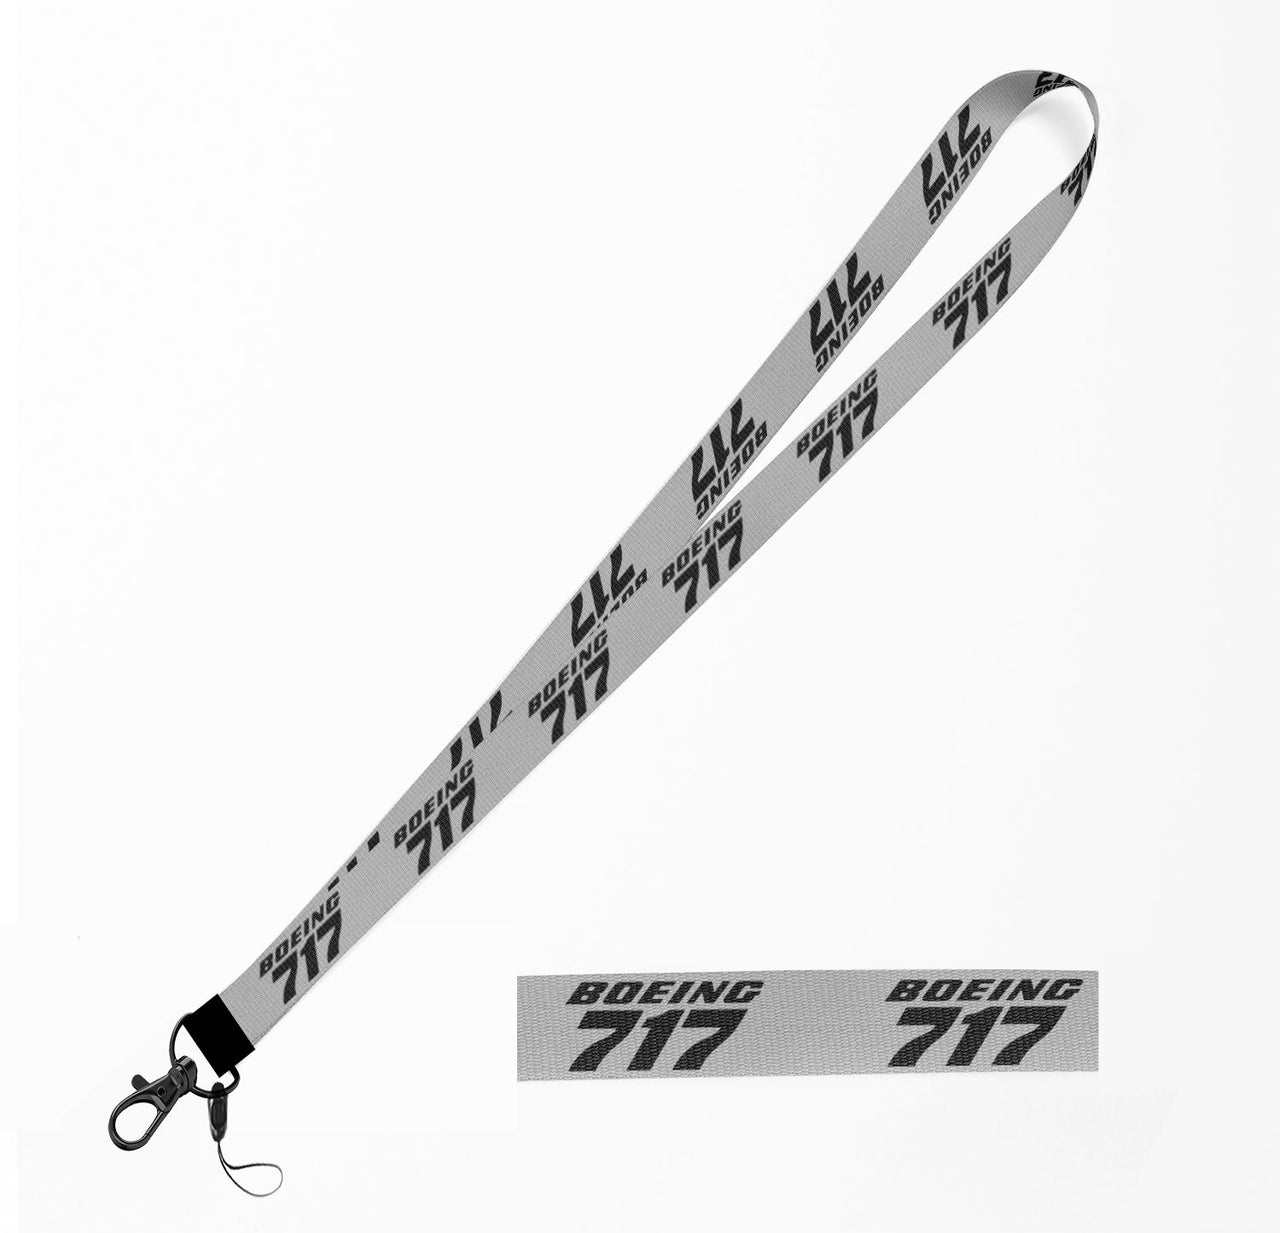 Boeing 717 & Text Designed Lanyard & ID Holders